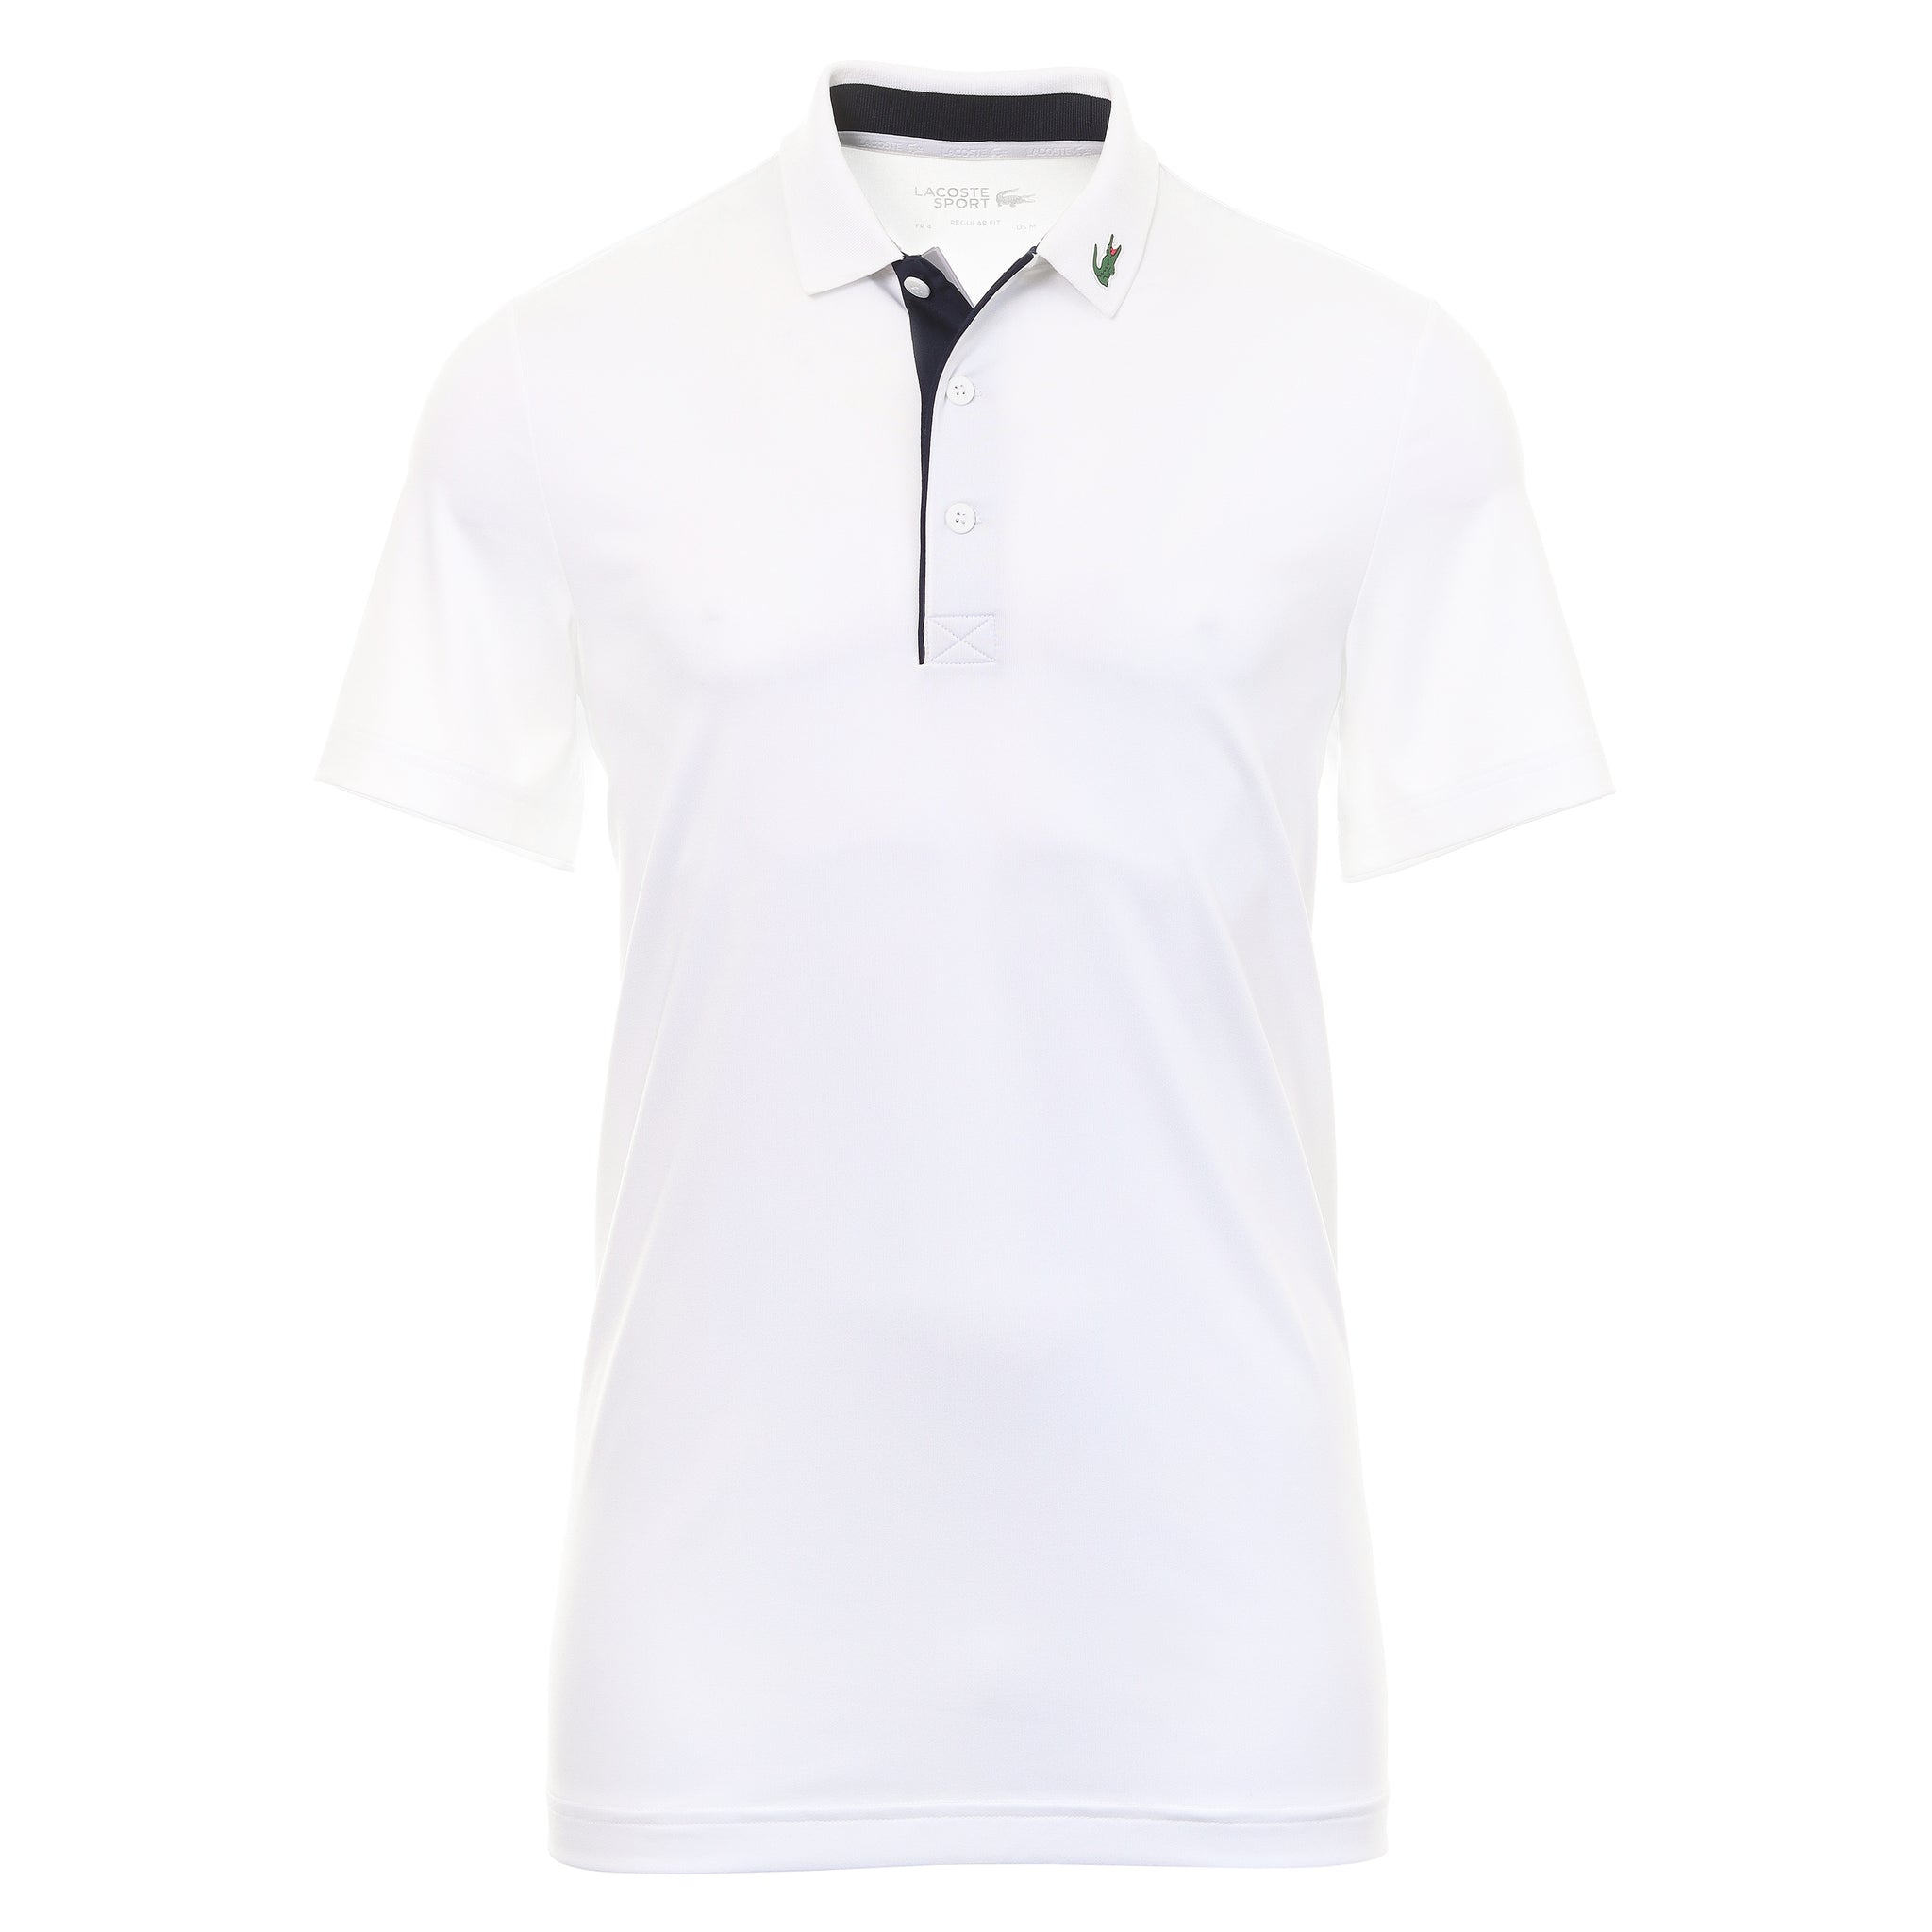 Lacoste Golf Essentials Polo Shirt DH3982 White 522 & Function18